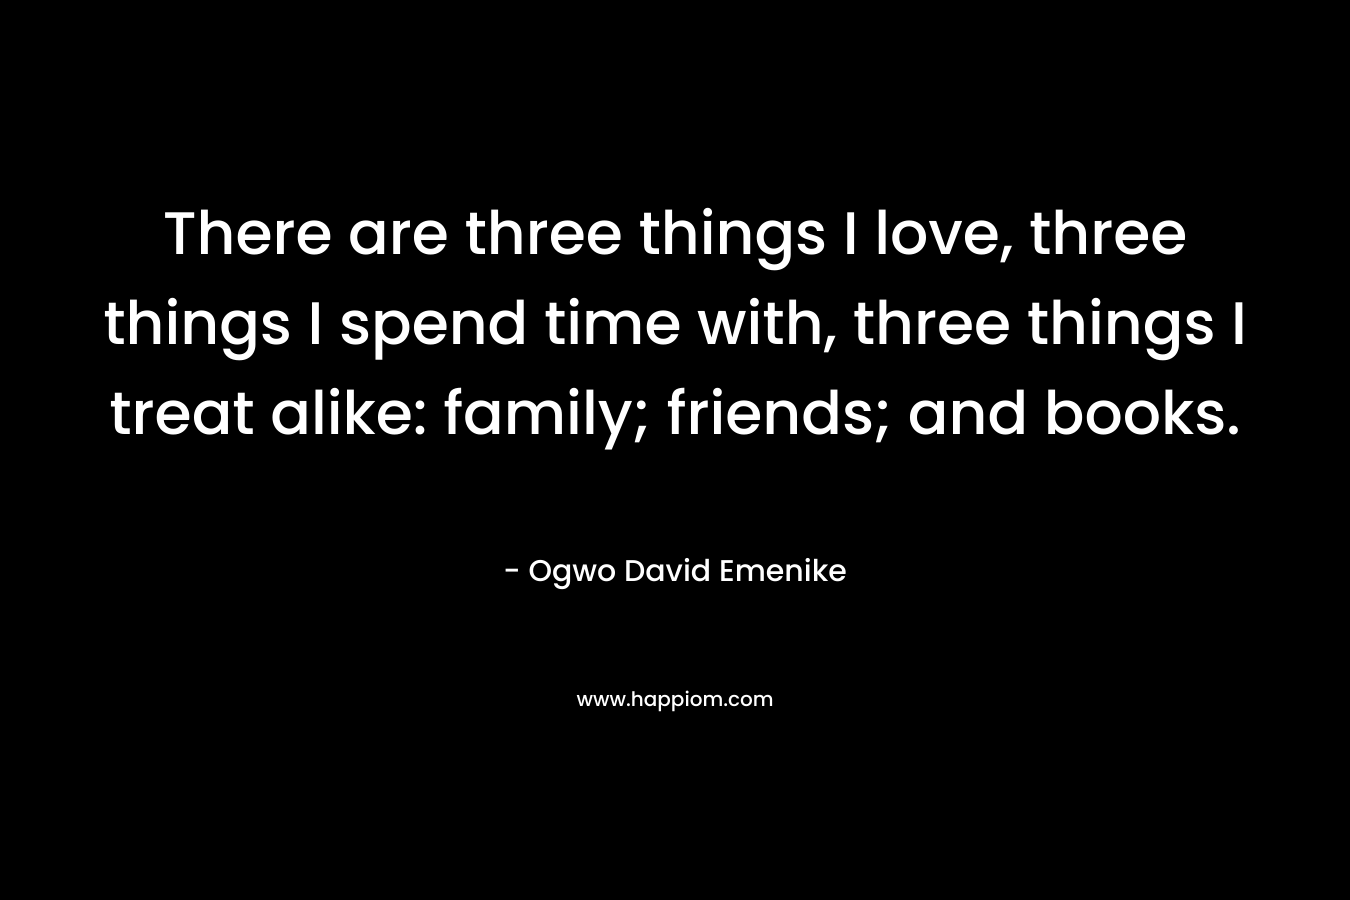 There are three things I love, three things I spend time with, three things I treat alike: family; friends; and books.